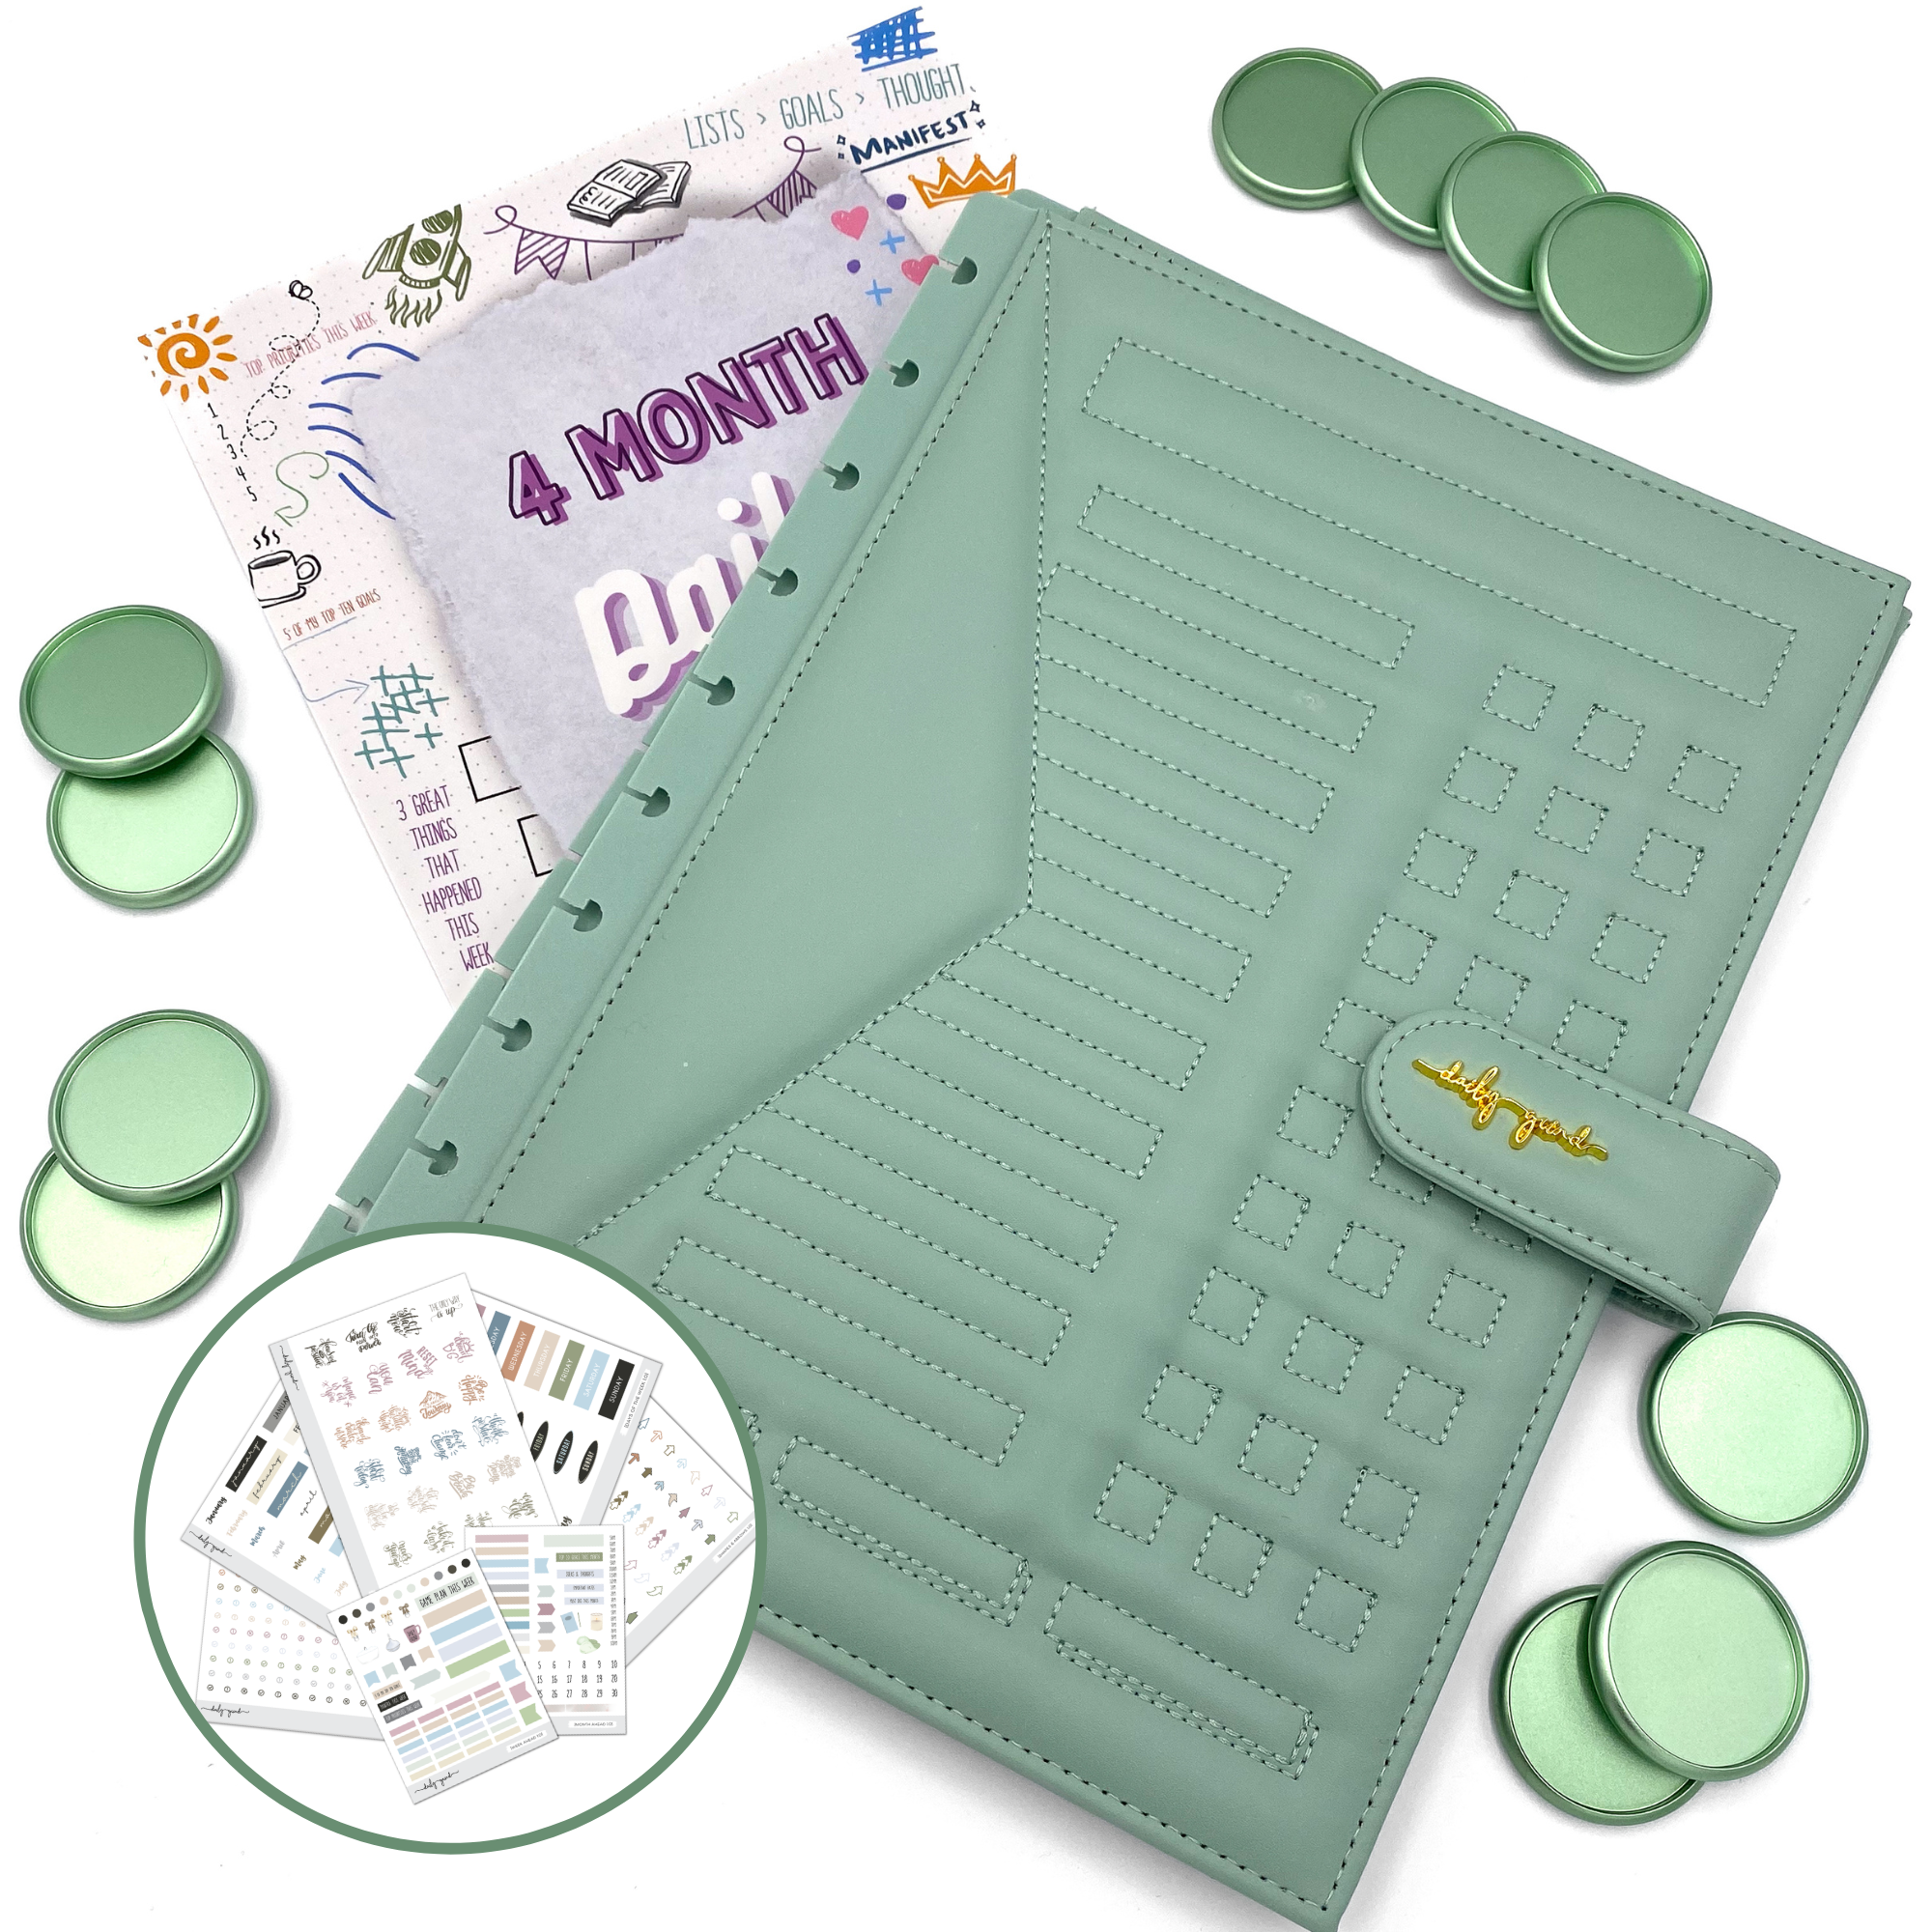 Green planner covers, discs, stickers and &quot;4 Month Daily Grind System&quot; insert sheets